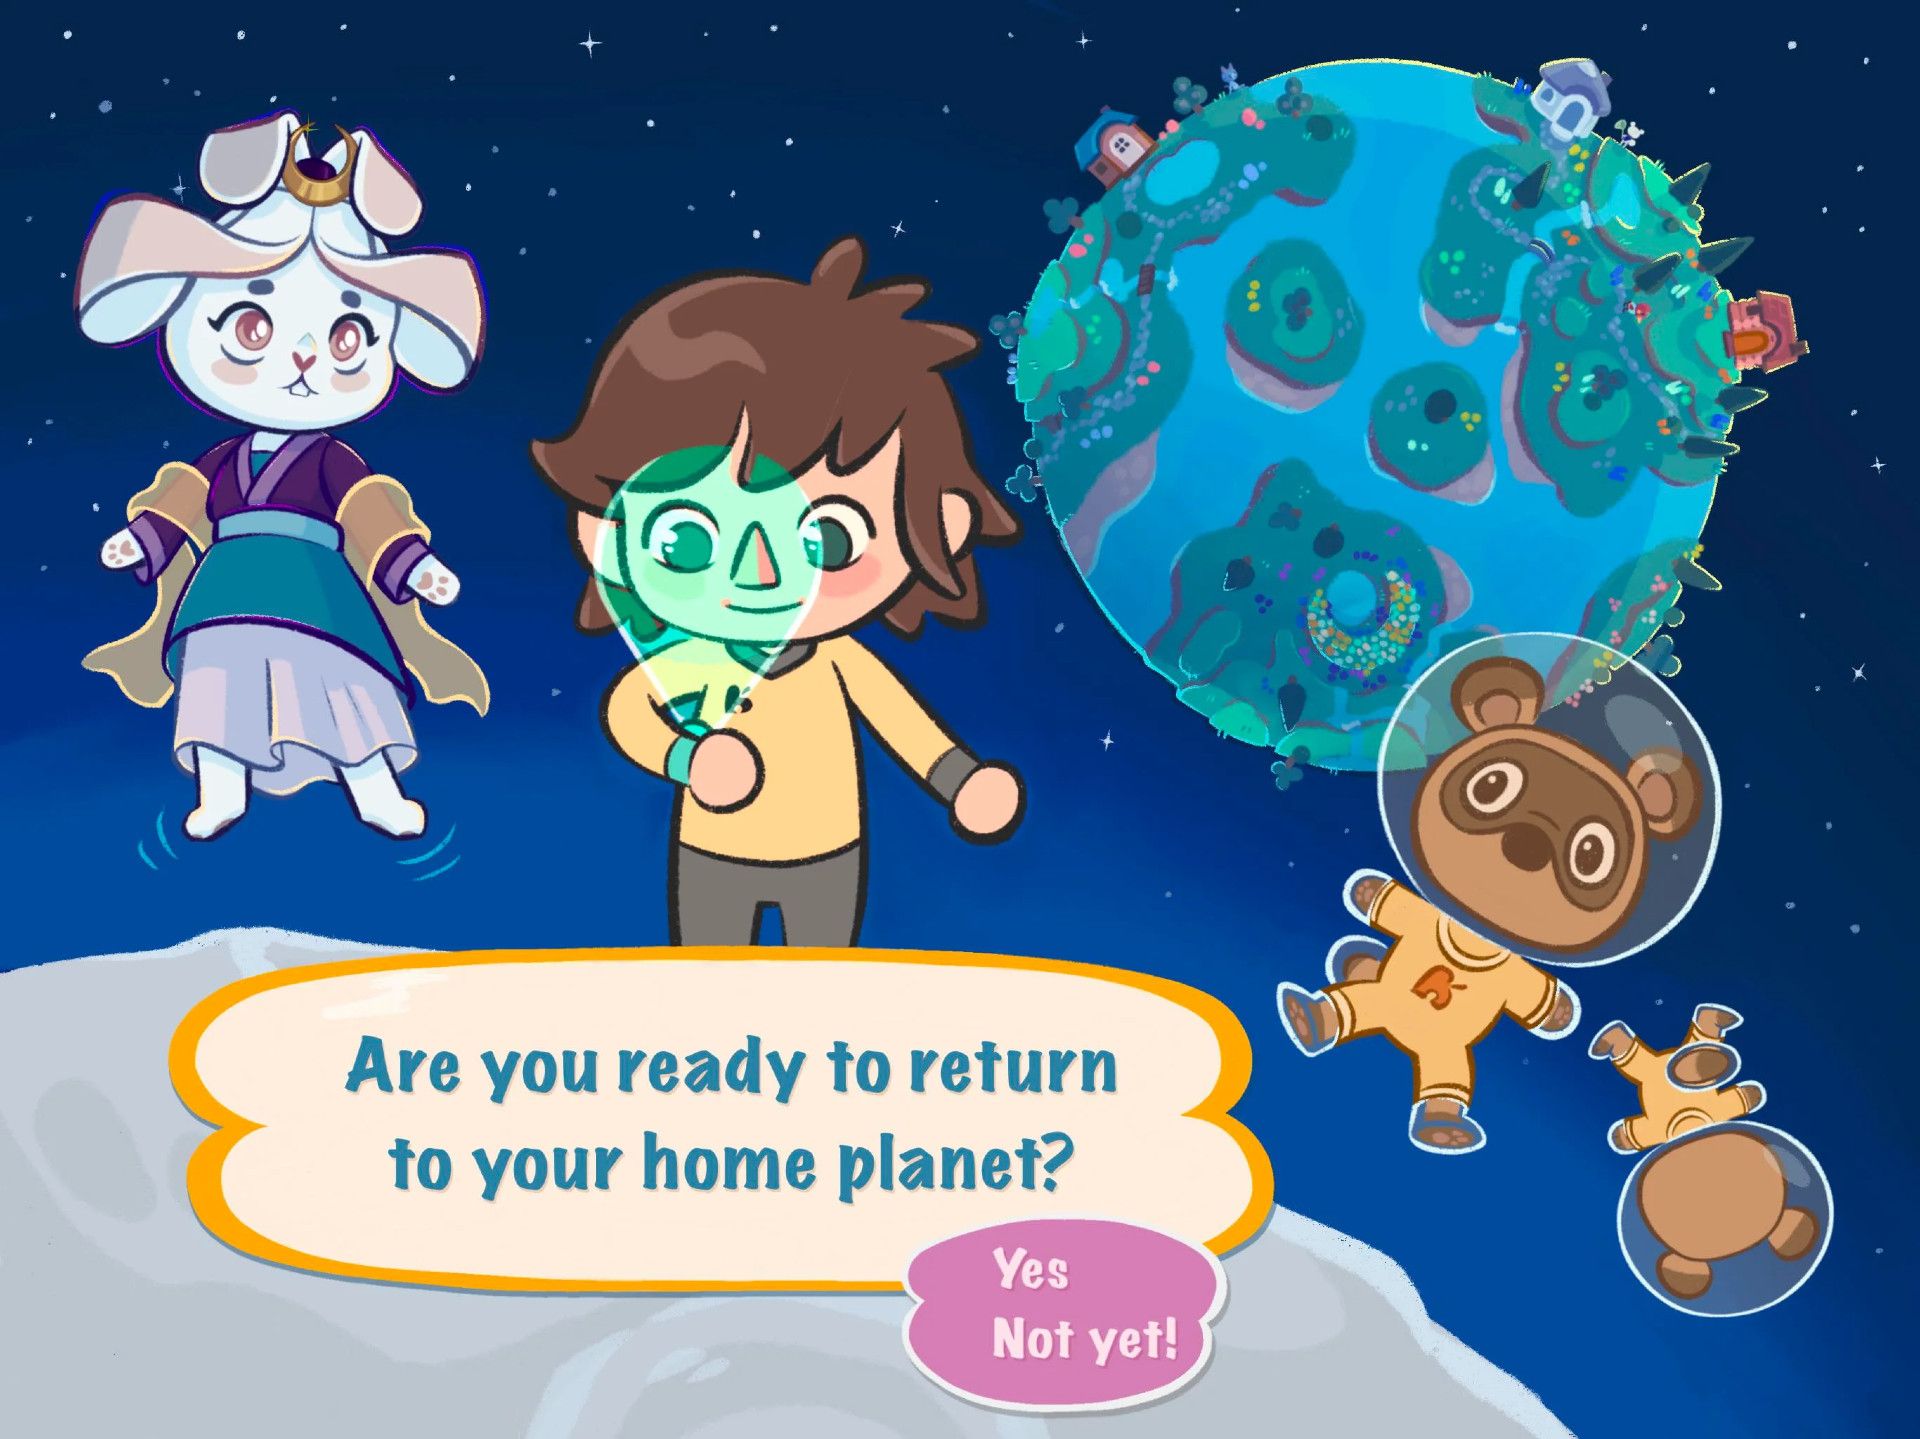 Animal Crossing In Space Concept Would Have Mario Galaxy-Like Planets